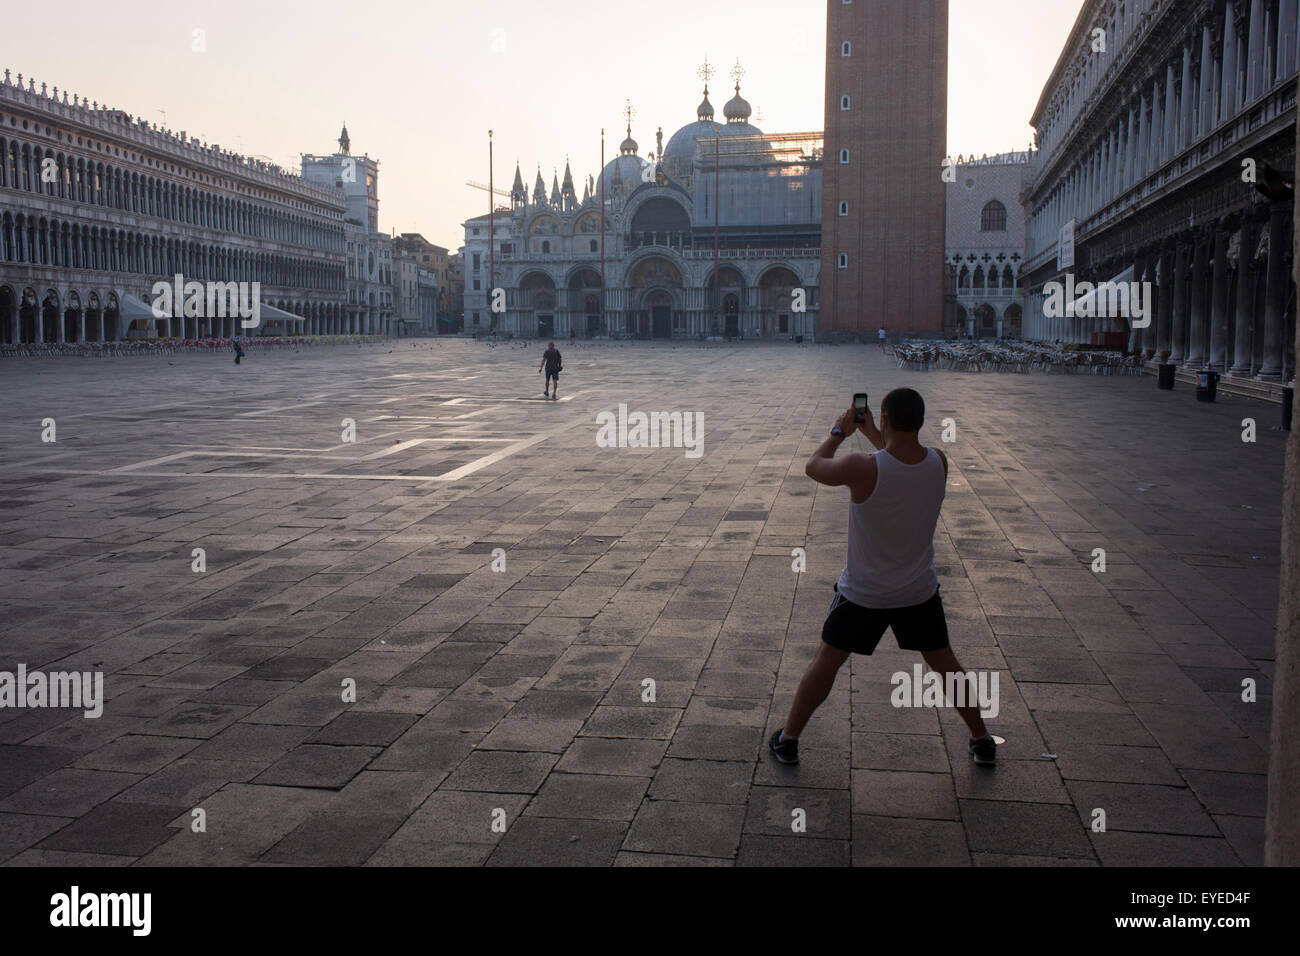 Early morning people in Piazza San Marco, Venice, Italy. Stock Photo